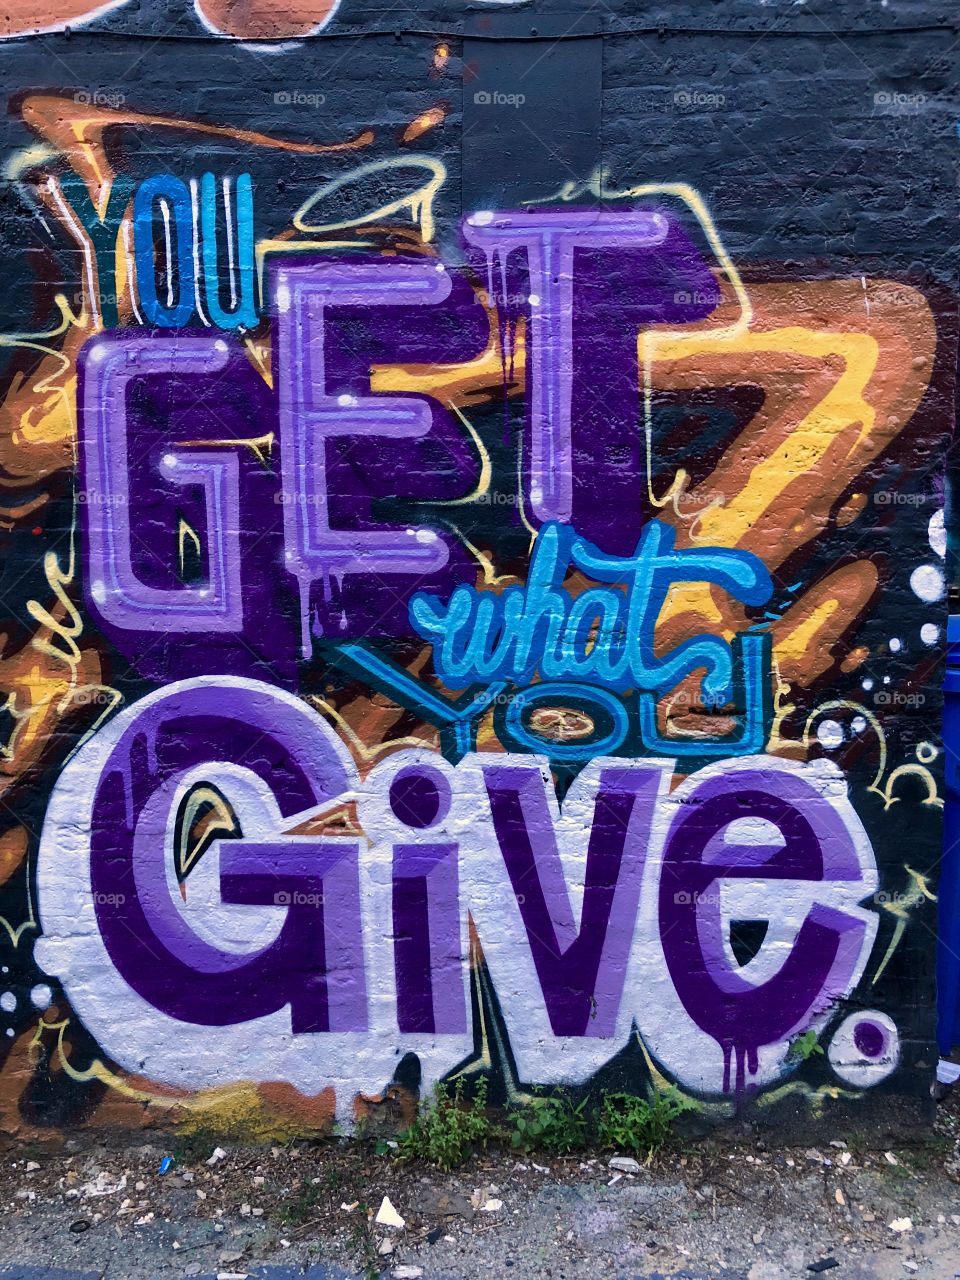 You GET what you GIVE